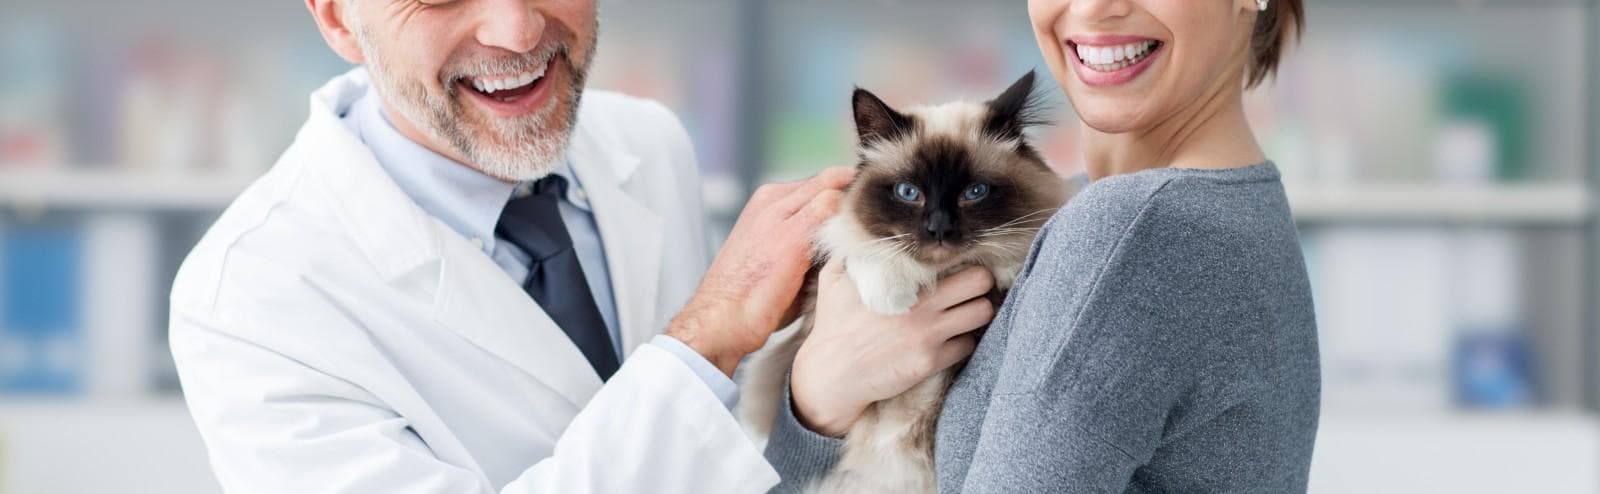 Veterinarian and lady with holding a cat